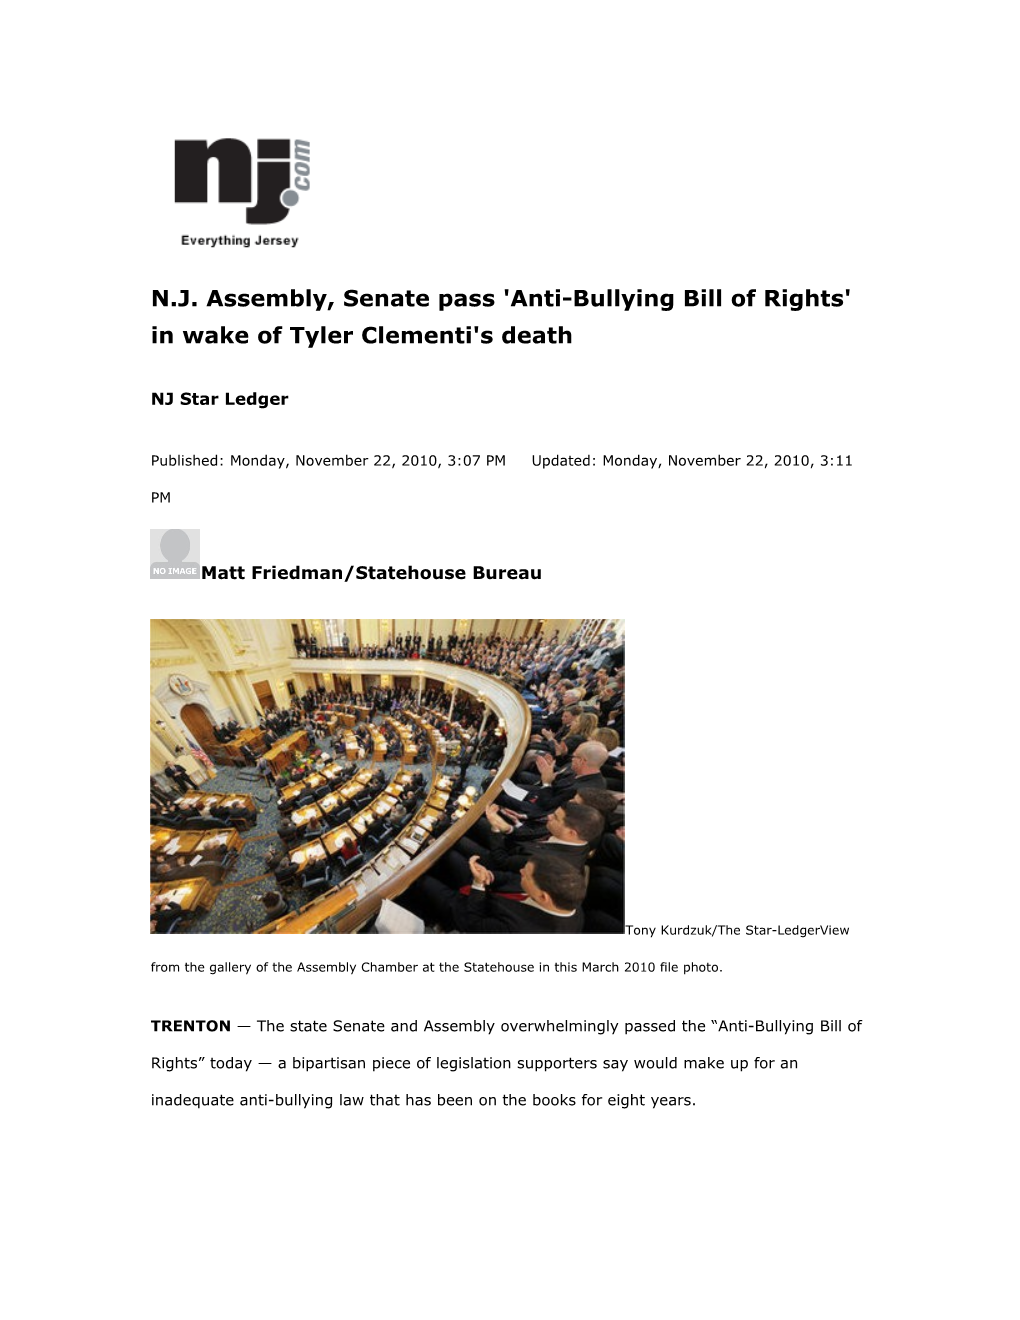 N.J. Assembly, Senate Pass 'Anti-Bullying Bill of Rights' in Wake of Tyler Clementi's Death